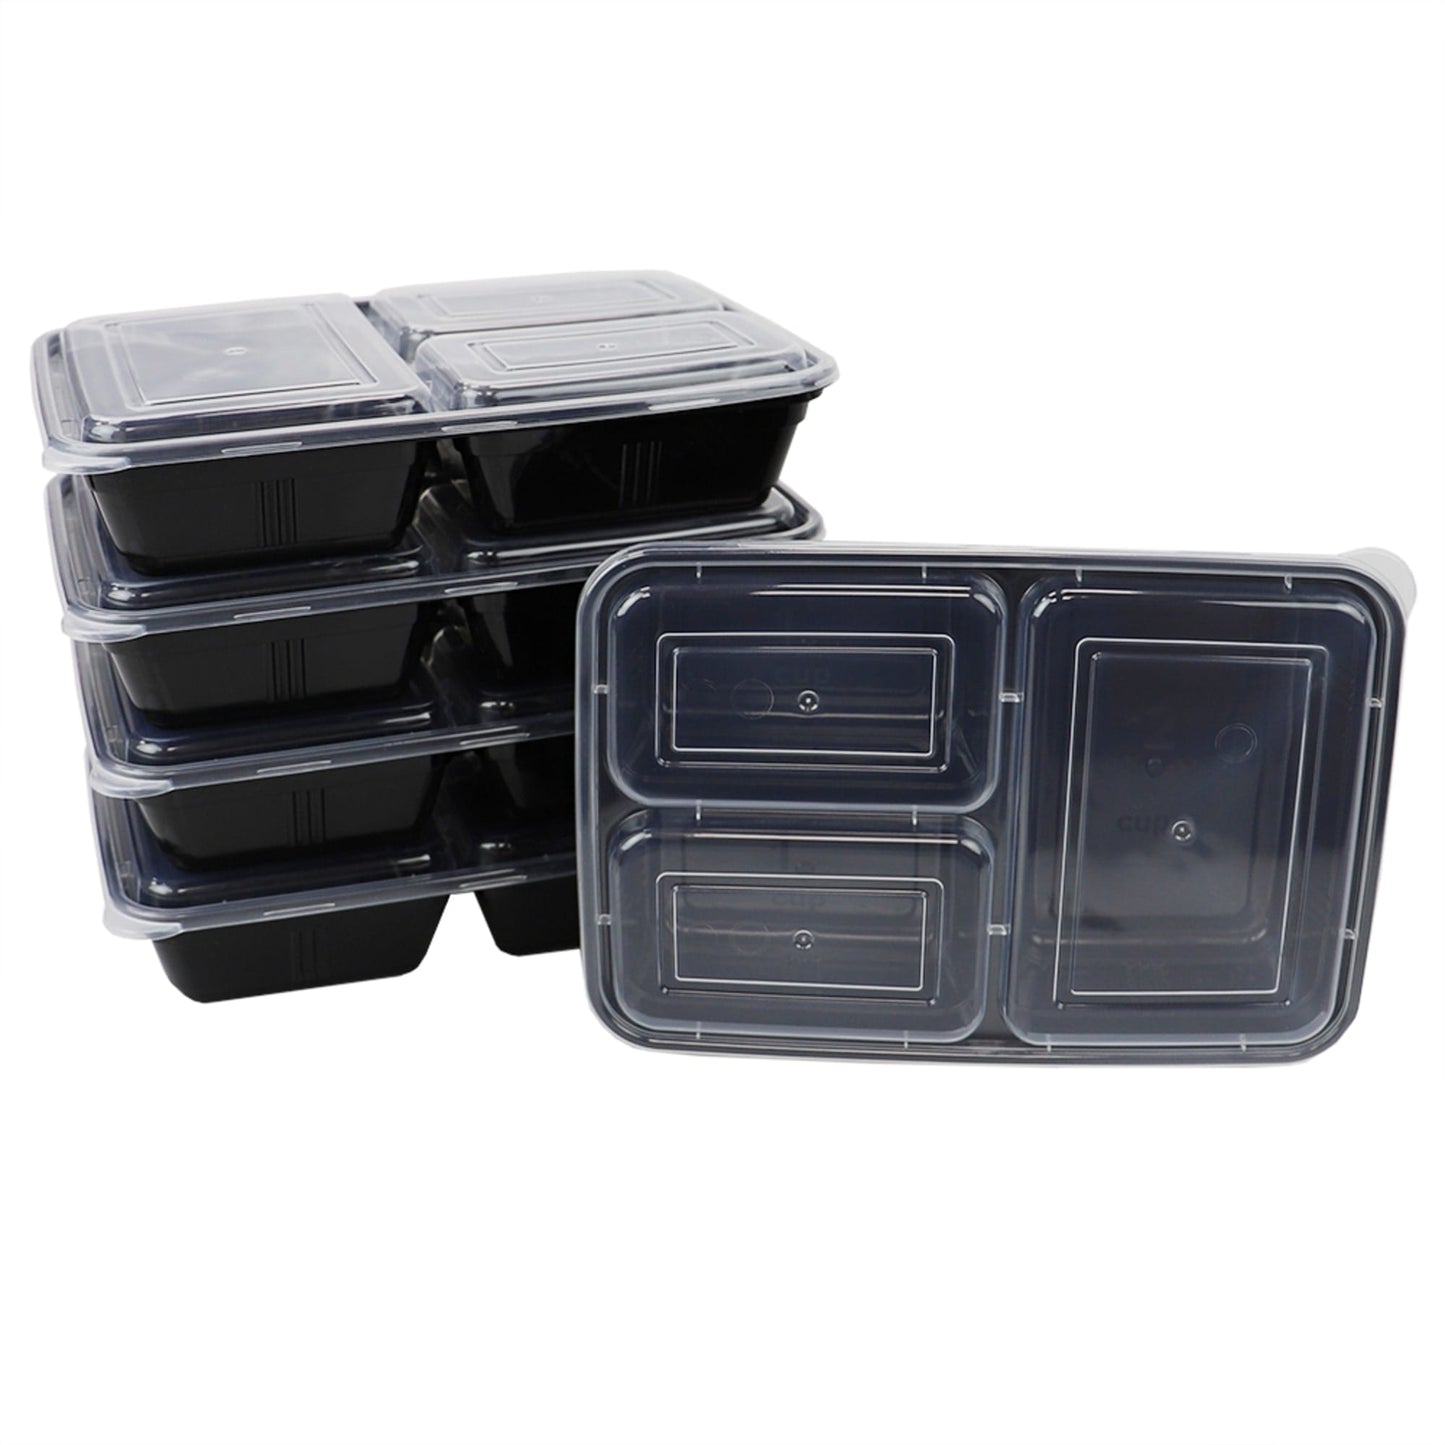 Home Basic 10 Piece 3 Compartment BPA-Free Plastic Meal Prep Containers, Black